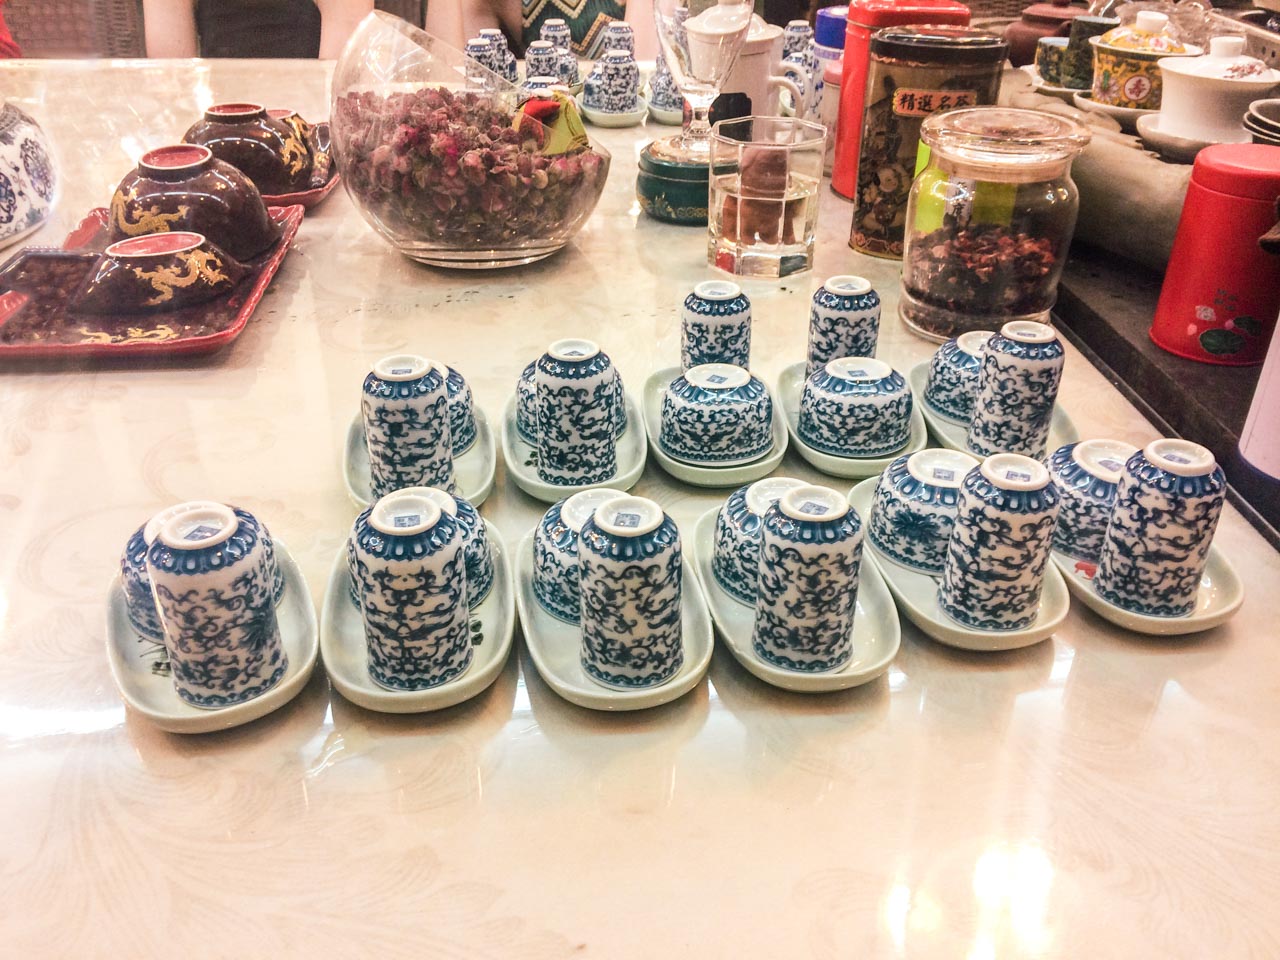 Rows of white and blue tea tasting sets inside a traditional tea house in Beijing, China